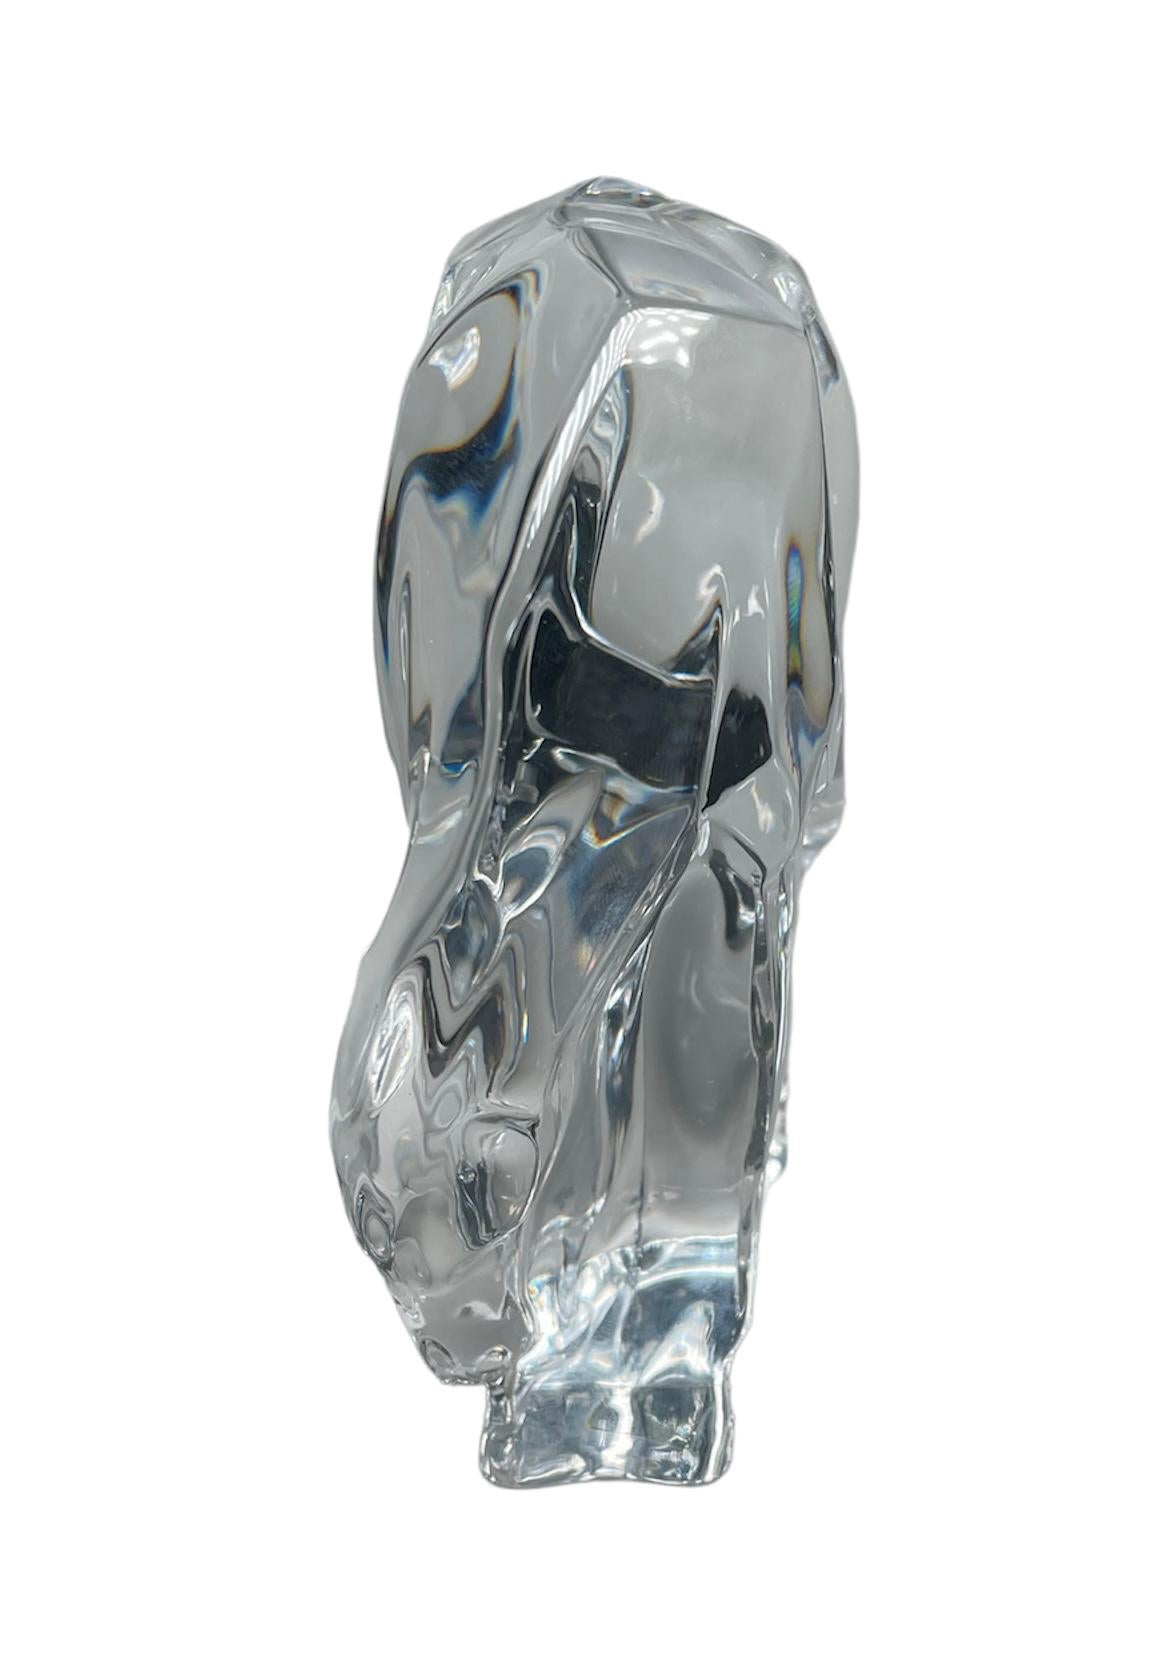 This is a Hoya Clear Crystal horse sculpture. It depicts a very well done relax horse in grazing position. The horse sculpture is standing also over a clear crystal rectangular base. Under the base, it is the Hoya Crystal made in Japan stamp.